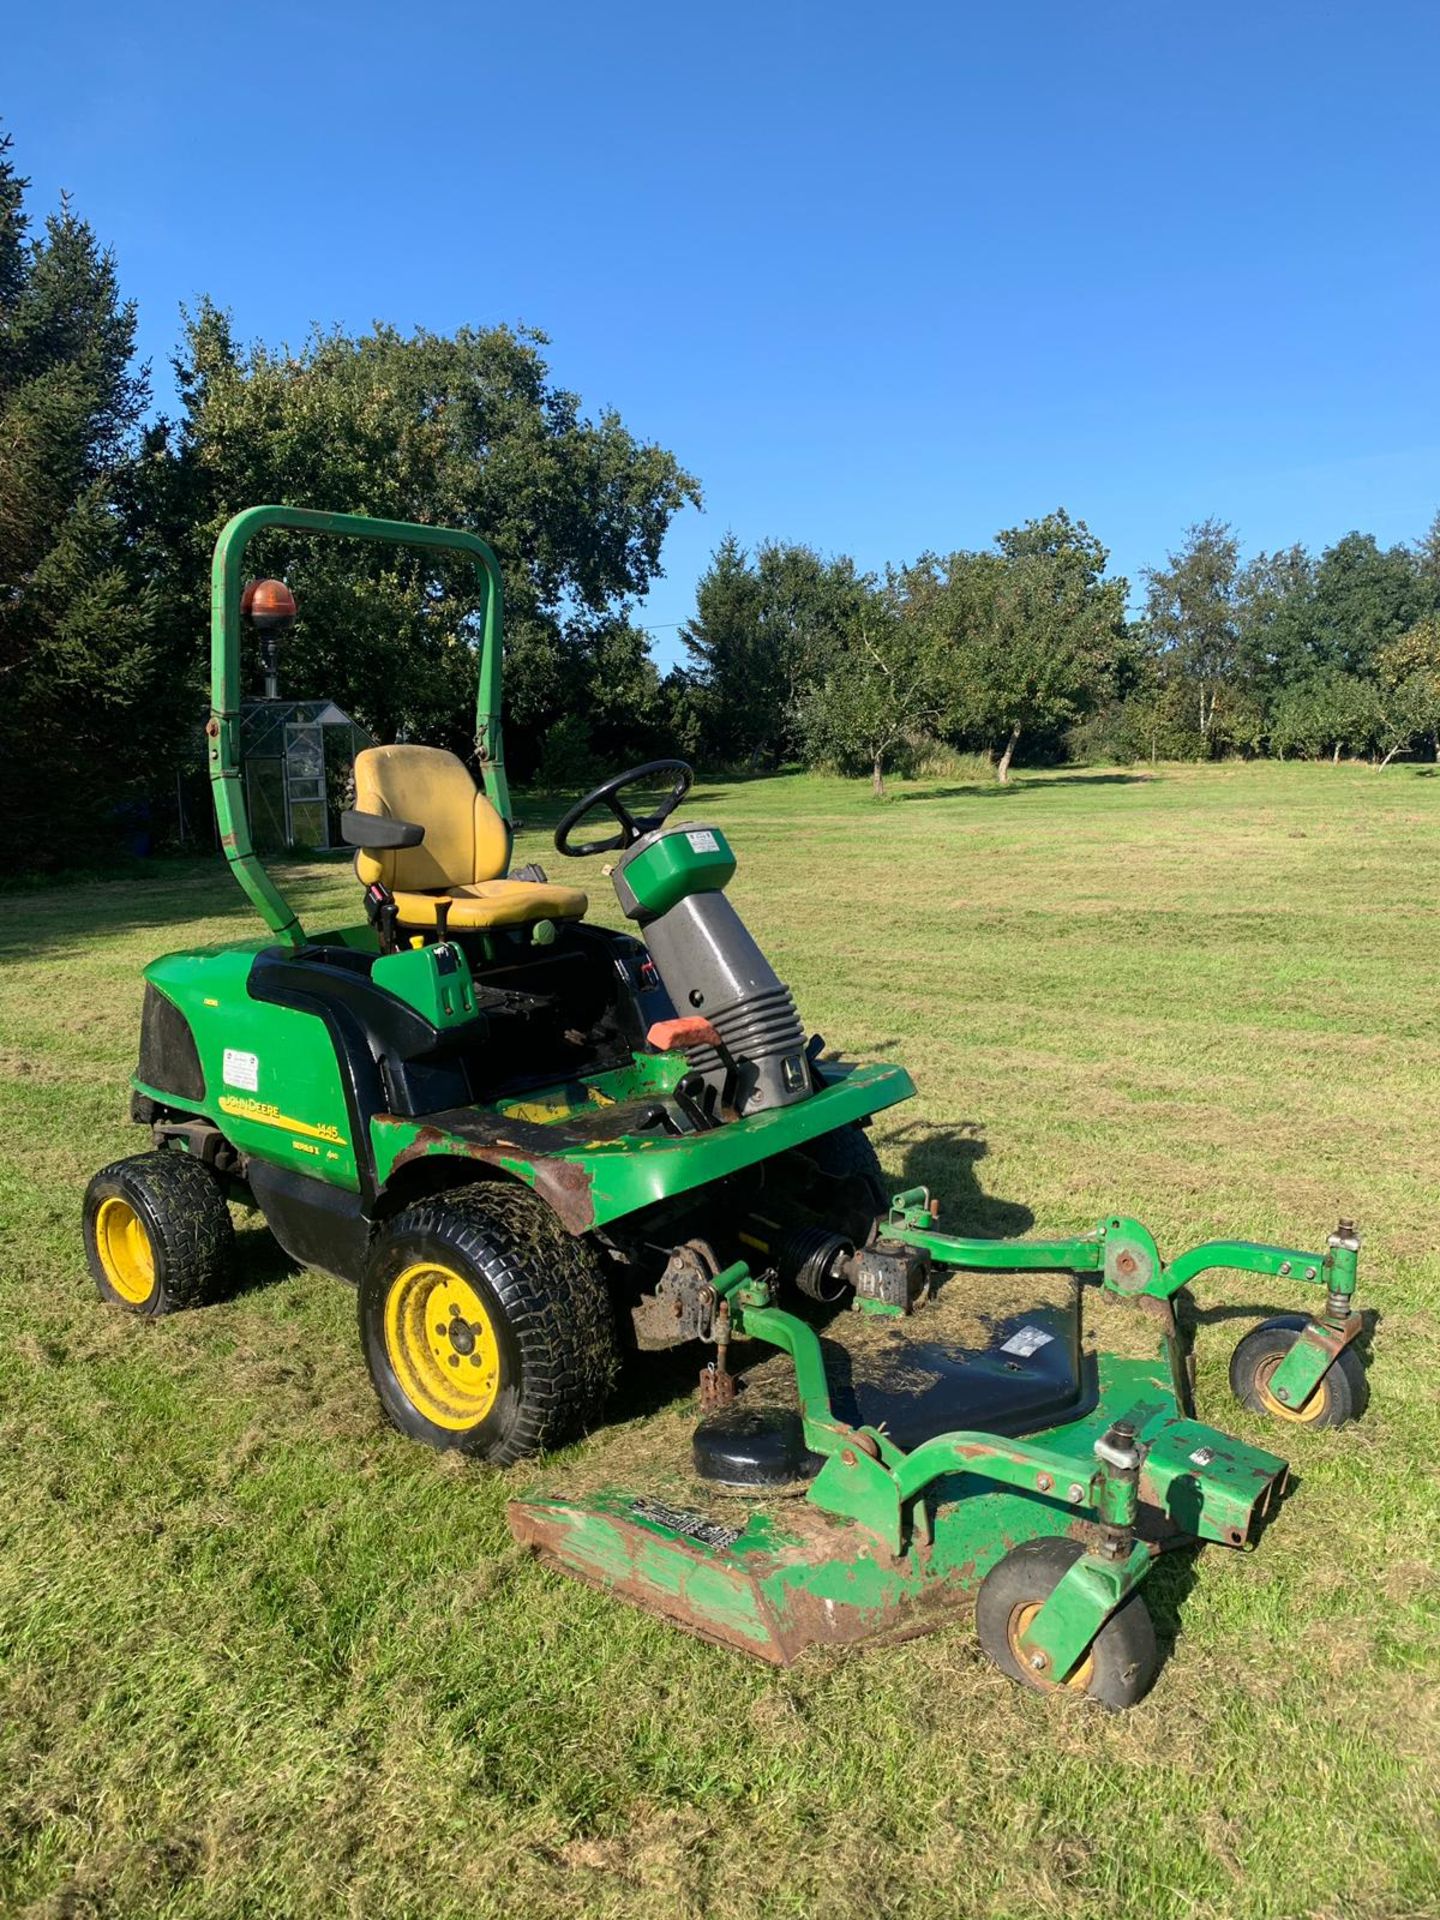 JOHN DEERE 1445 SERIES II 4WD RIDE ON DIESEL LAWN MOWER C/W OUT-FRONT ROTARY CUTTING DECK *PLUS VAT* - Image 2 of 14